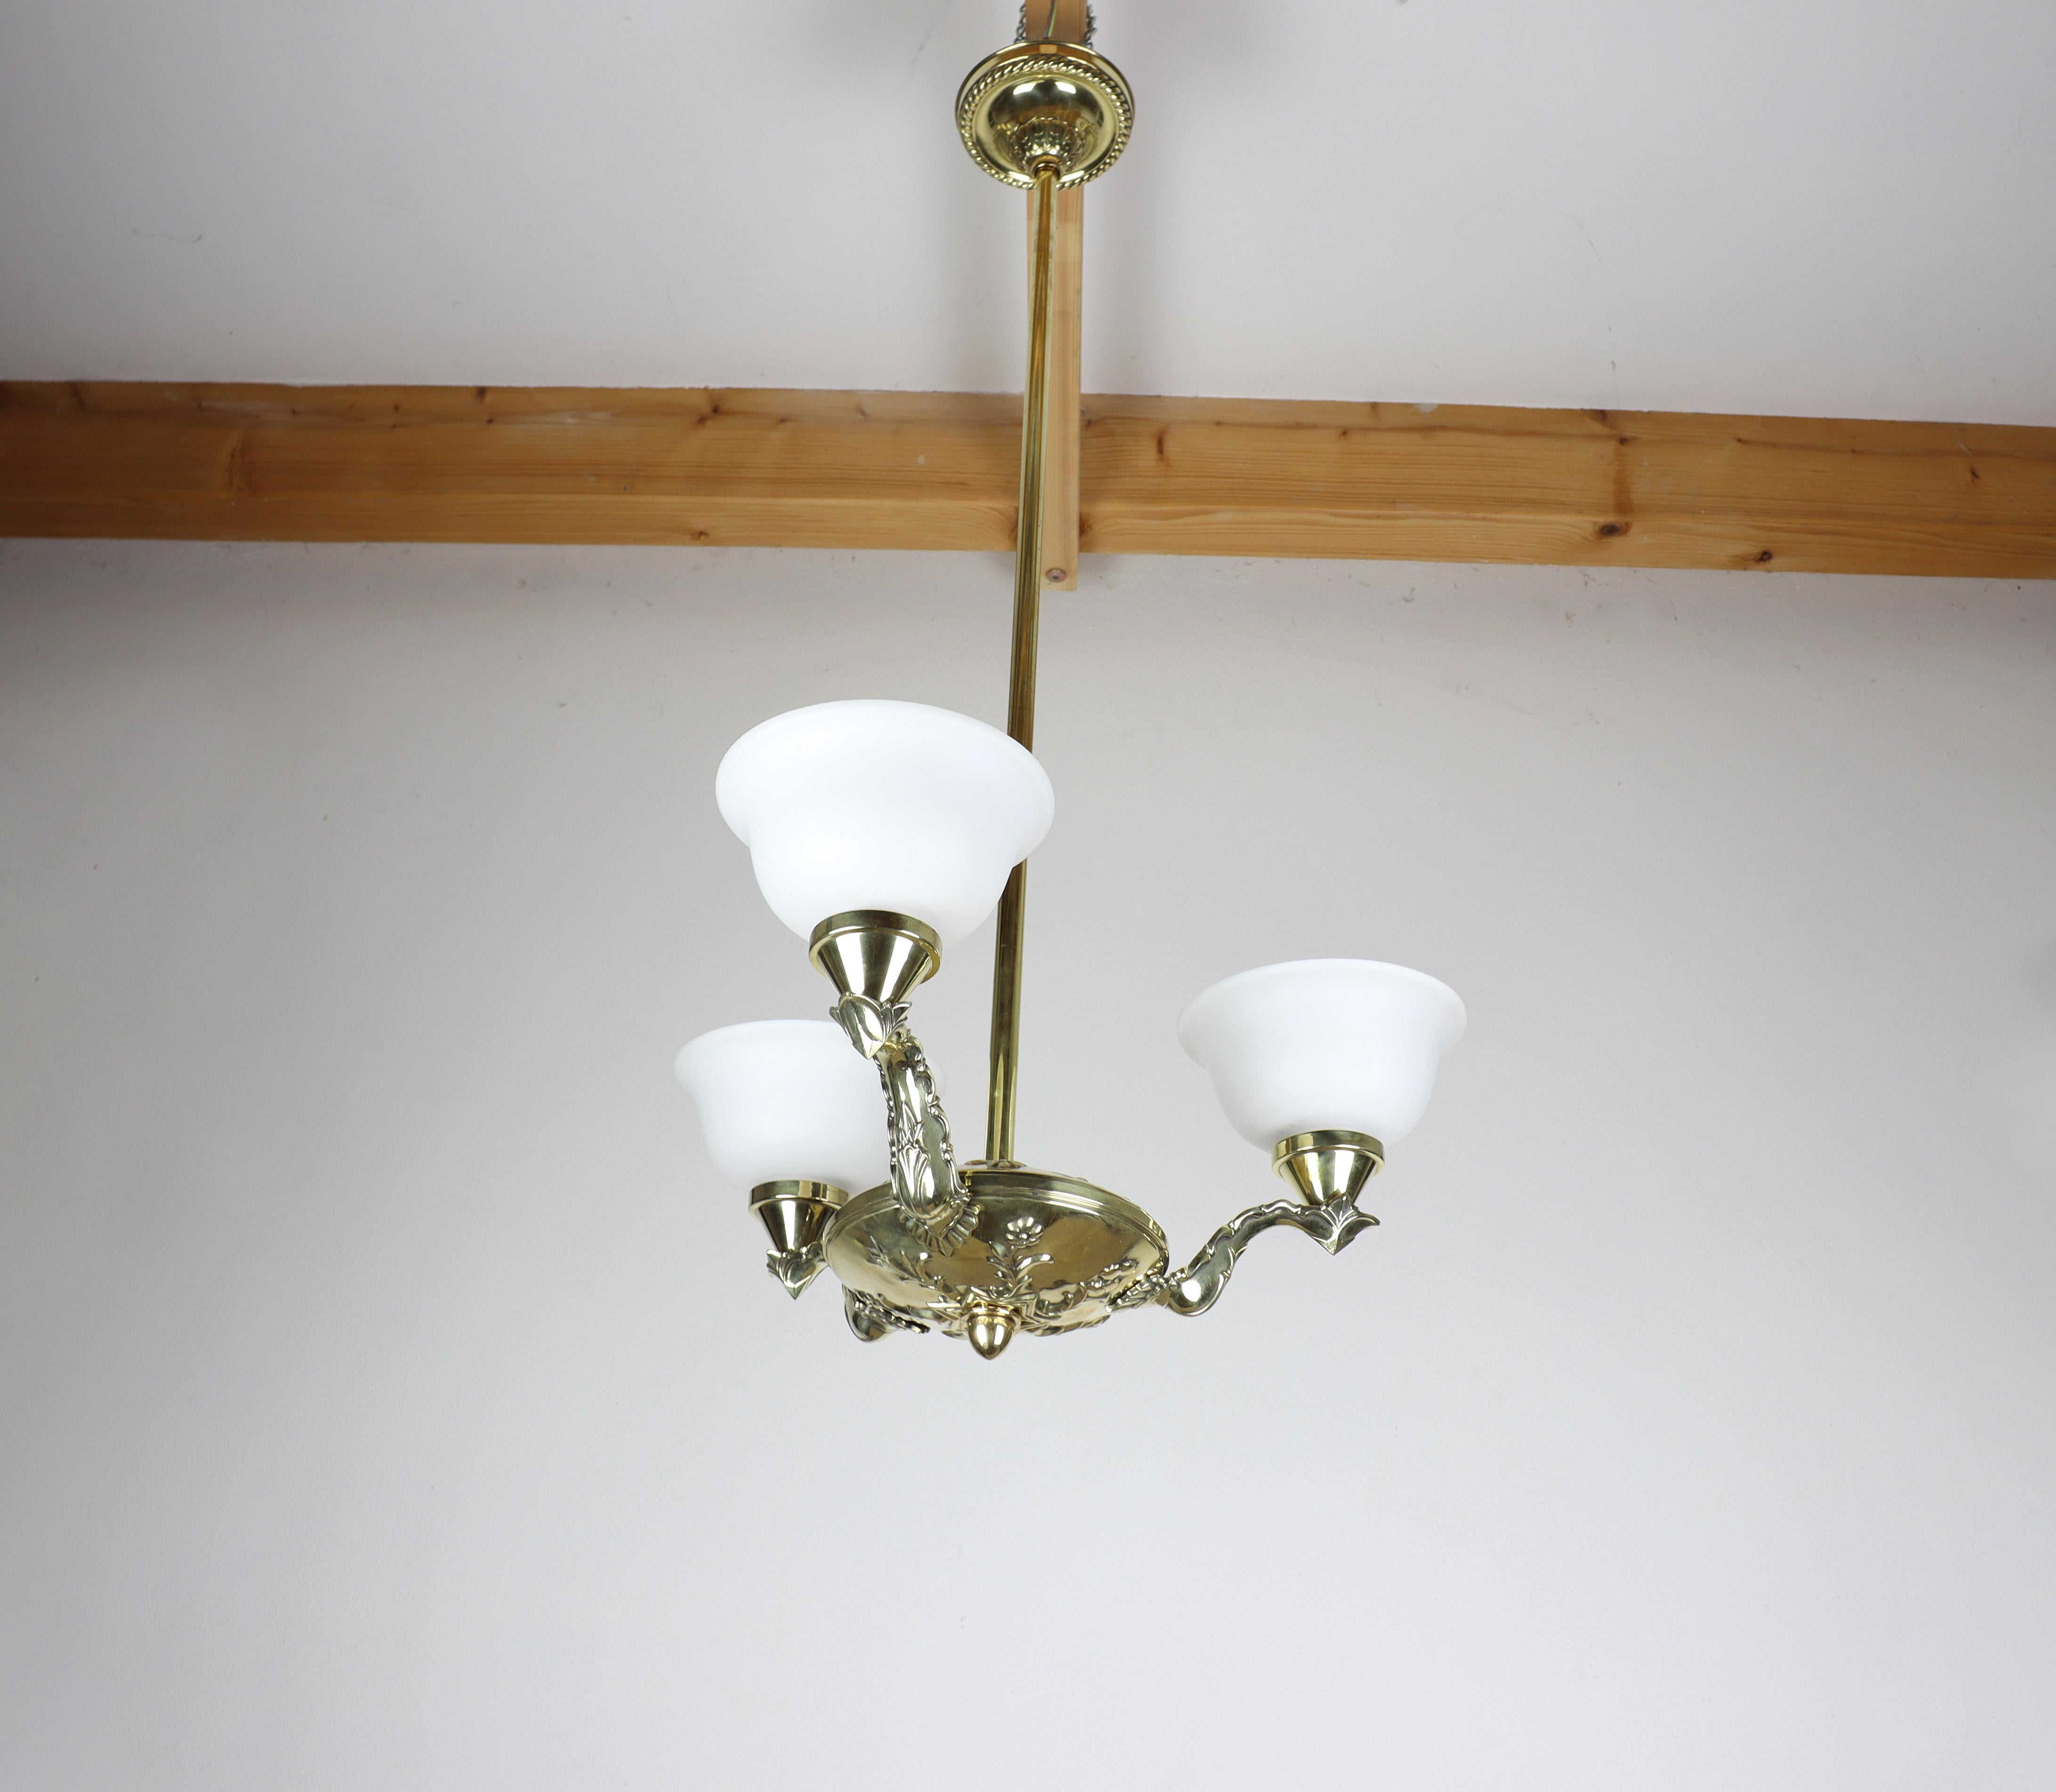 Early 20th Century Art Nouveau Brass Chandelier with Embossed Elements For Sale